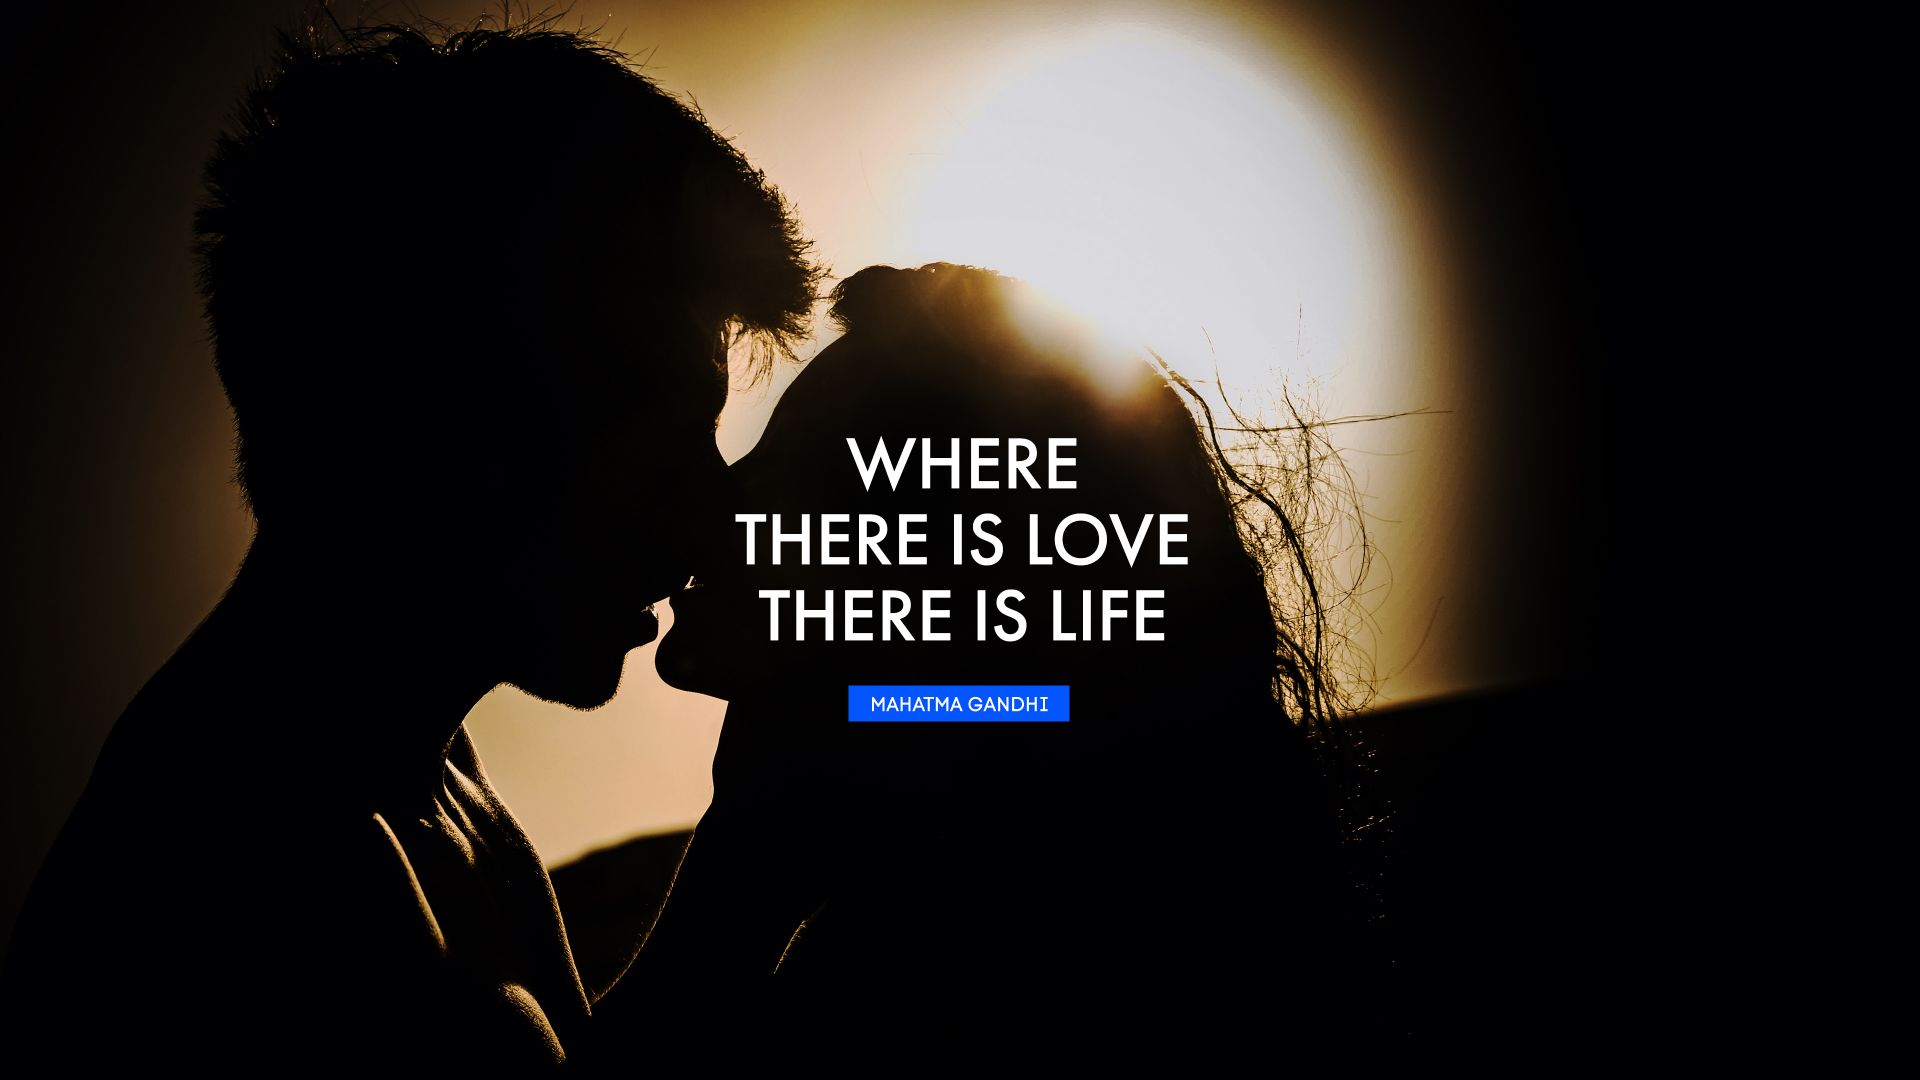 Where there is love there is life. - Quote by Mahatma Gandhi